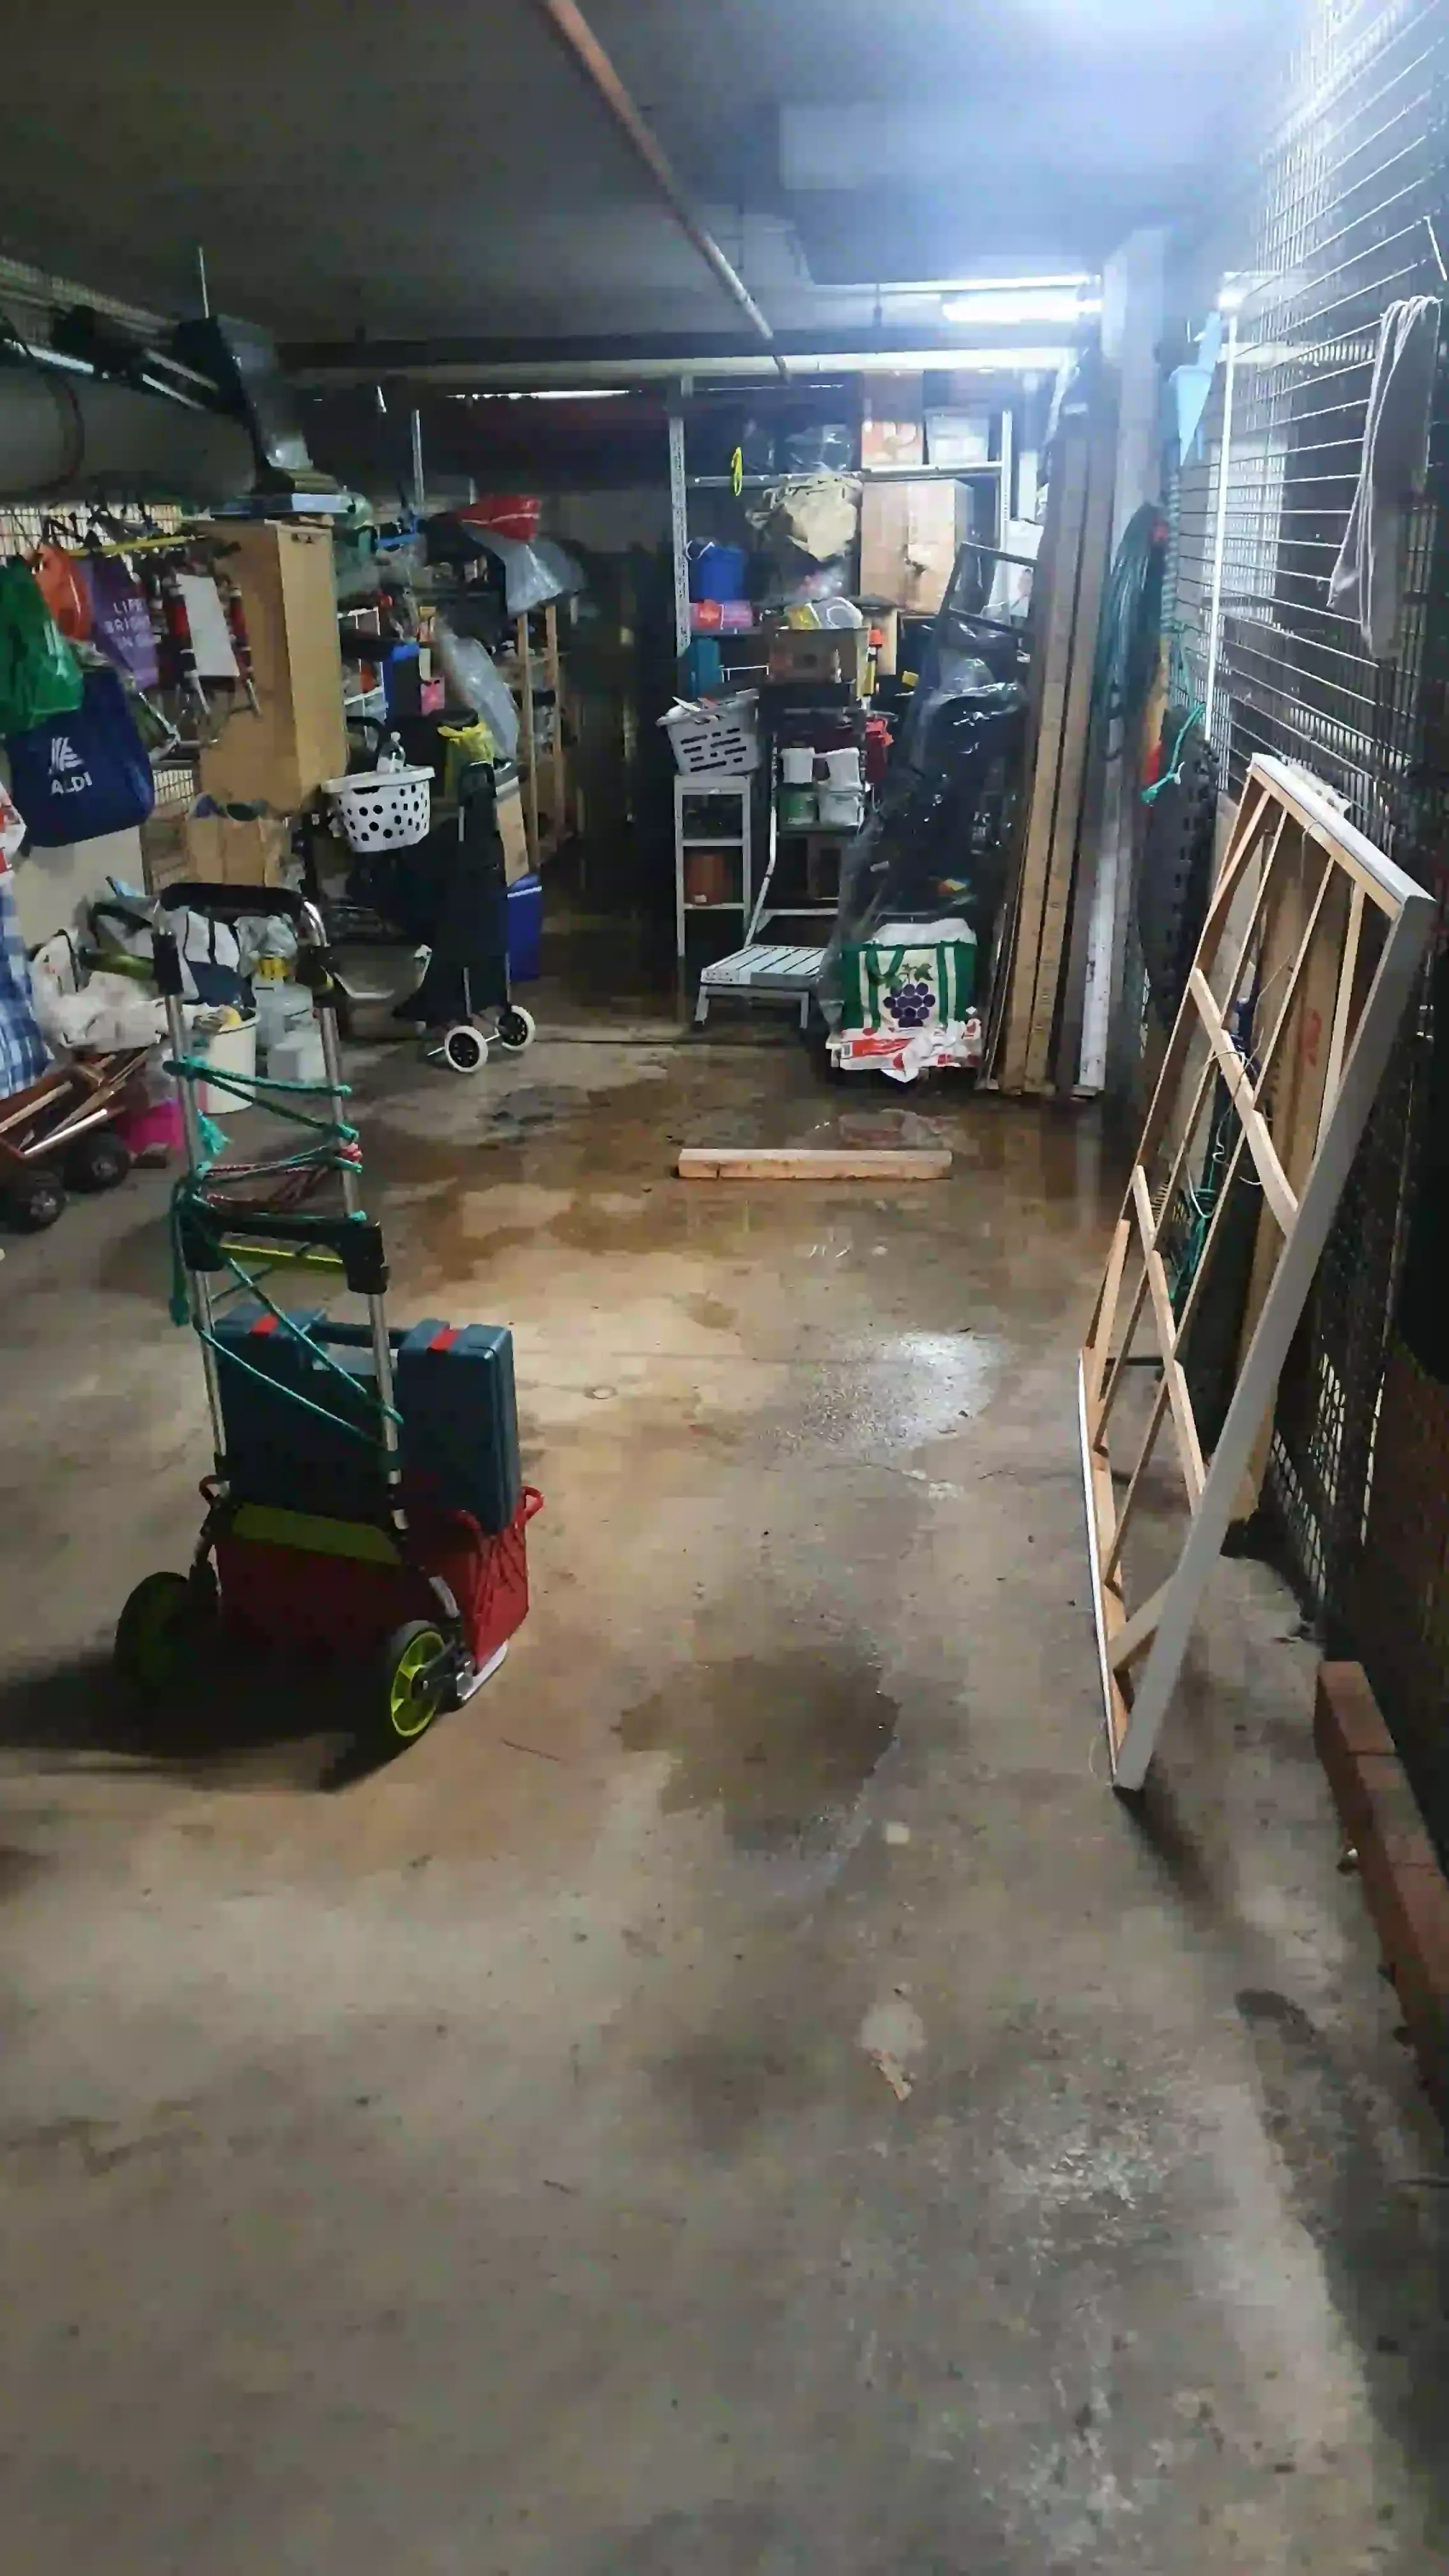 SP52948-examples-of-serious-damages-due-to-water-leakages-in-Lot-186-garage-photo-5-1Mar2022.webp